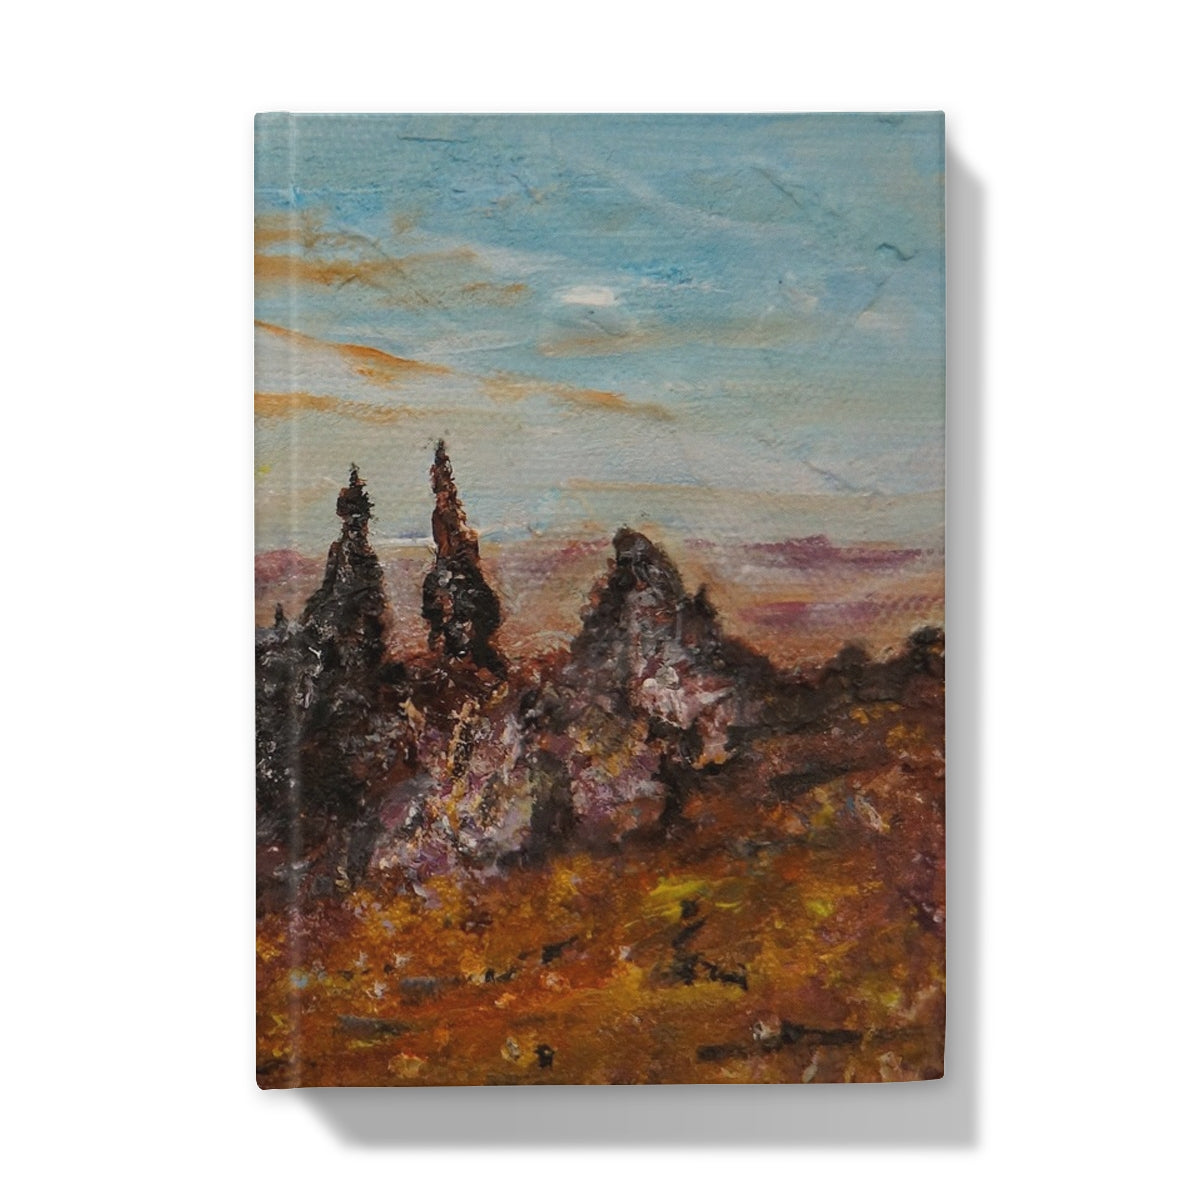 The Old Man Of Storr Skye Art Gifts Hardback Journal-Journals & Notebooks-Skye Art Gallery-A5-Plain-Paintings, Prints, Homeware, Art Gifts From Scotland By Scottish Artist Kevin Hunter